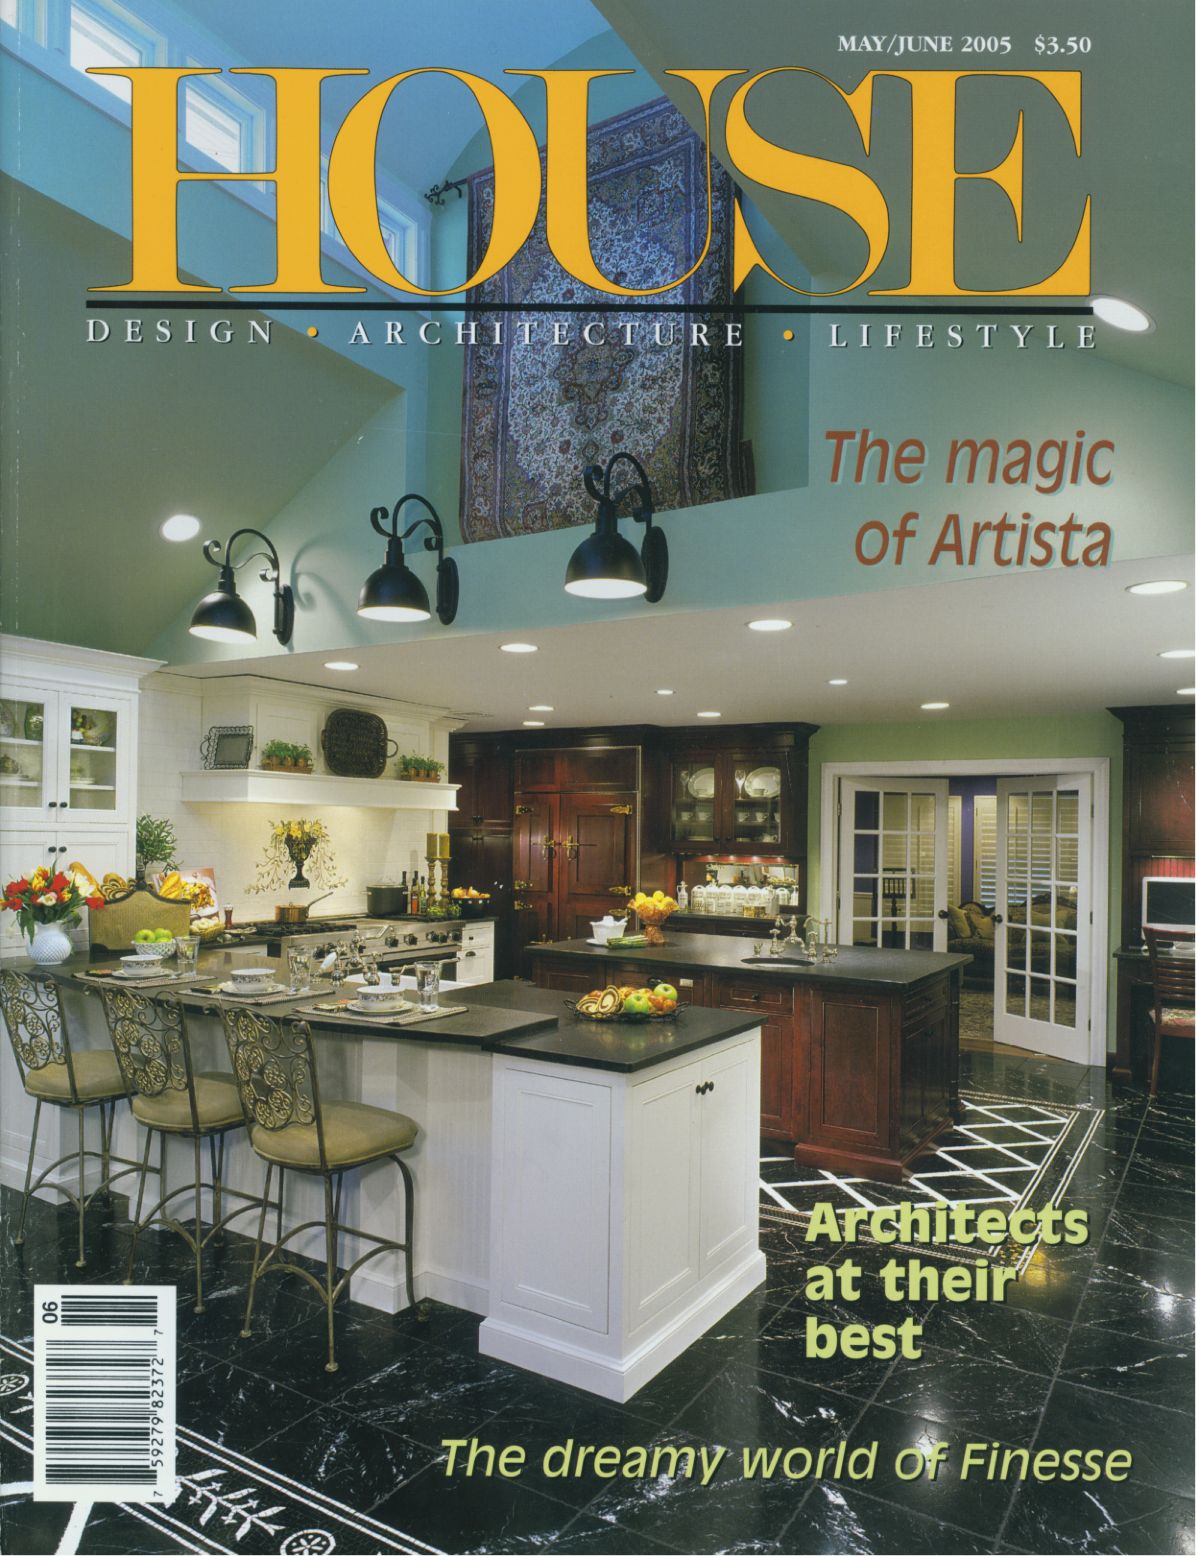 Front cover of an issue of House Magazine that features a high-end kitchen.